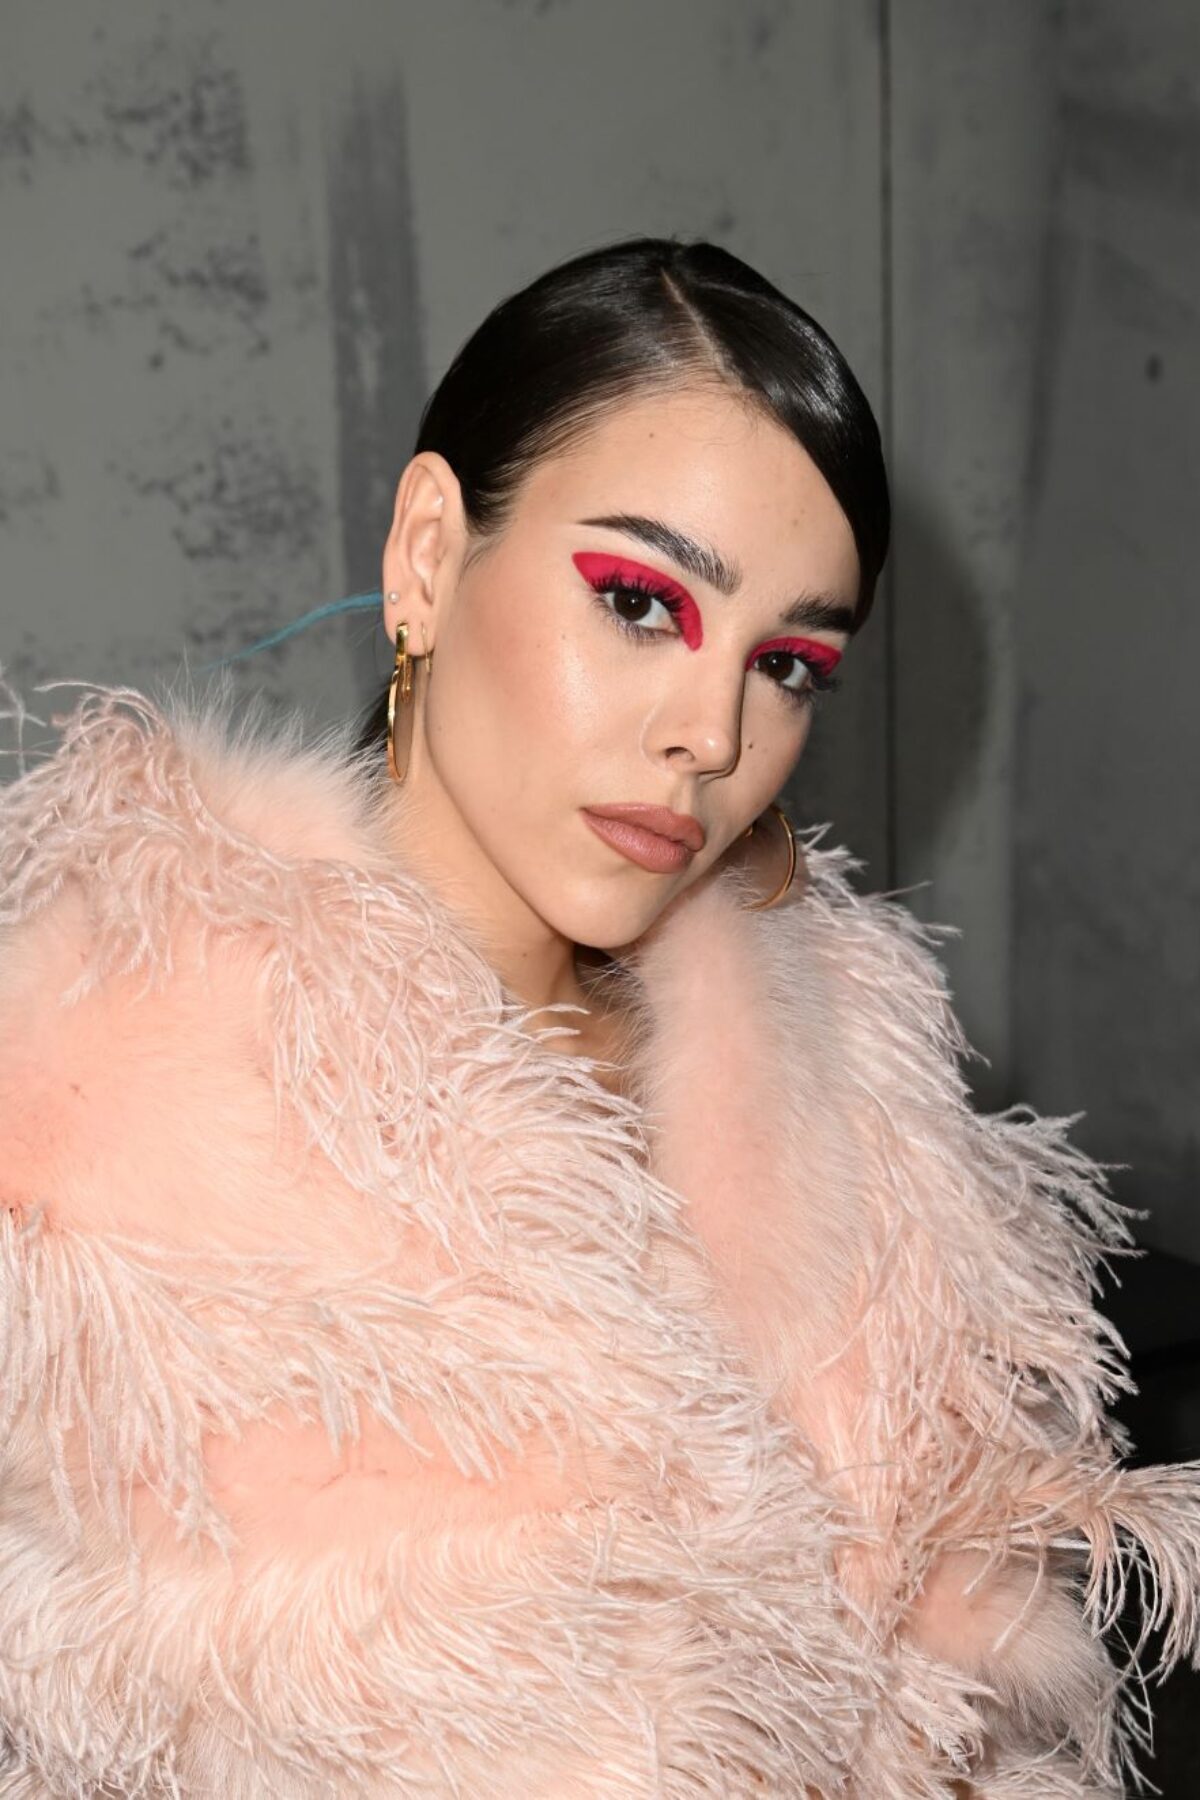 MILAN, ITALY - FEBRUARY 23: Danna Paola attends the Fendi Fashion Show on February 23, 2022 in Milan, Italy. (Photo by Jacopo M. Raule/Getty Images for Fendi)_Premios Juventud